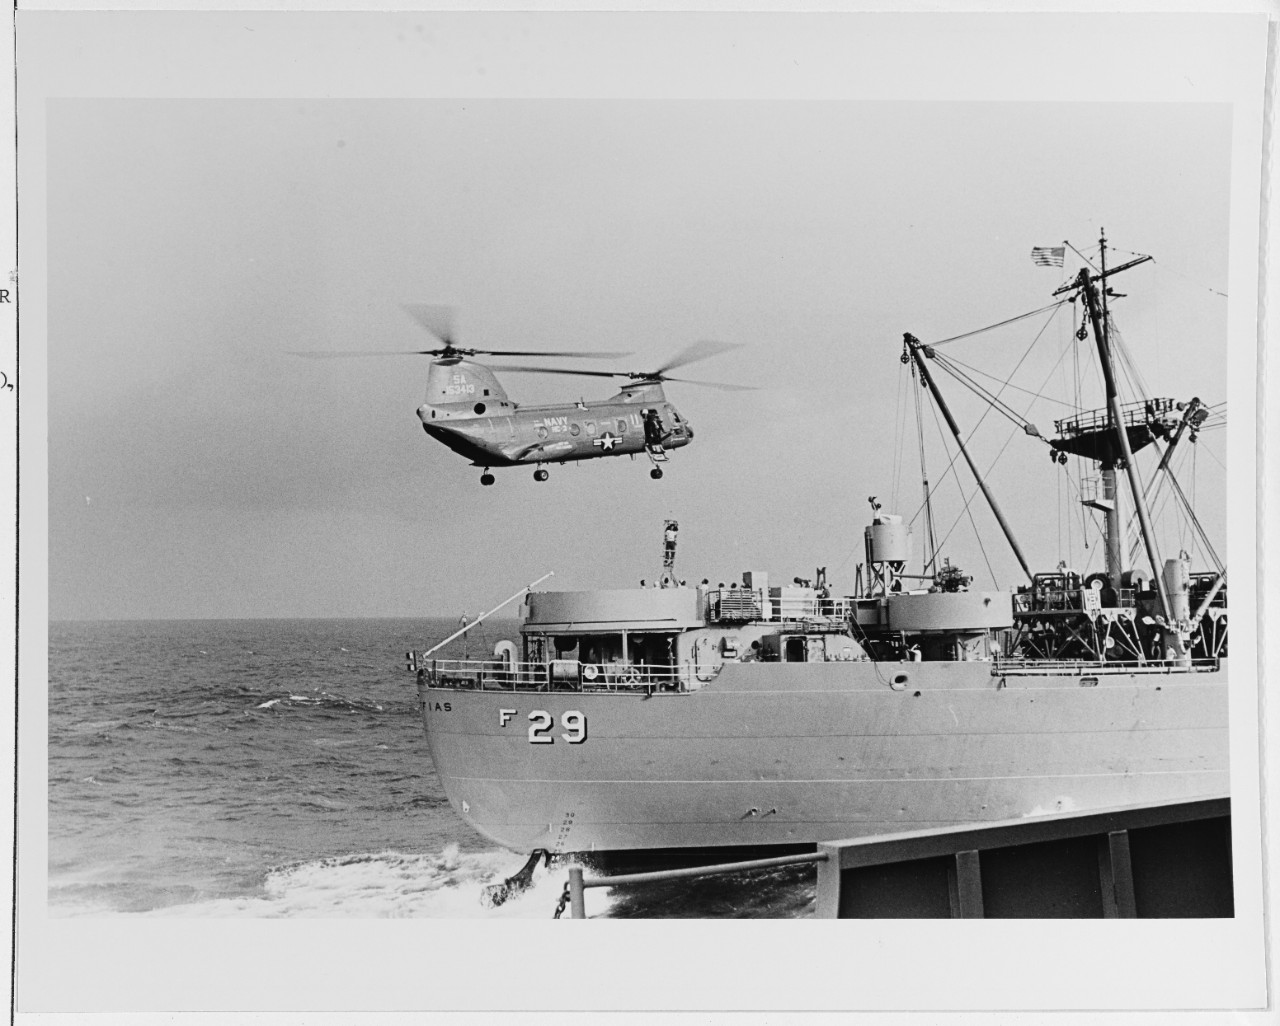 Transporting an Injured Crewman from  USS GRAFIAS (AF-29) to USS CONSTELLATION (CVA-64)